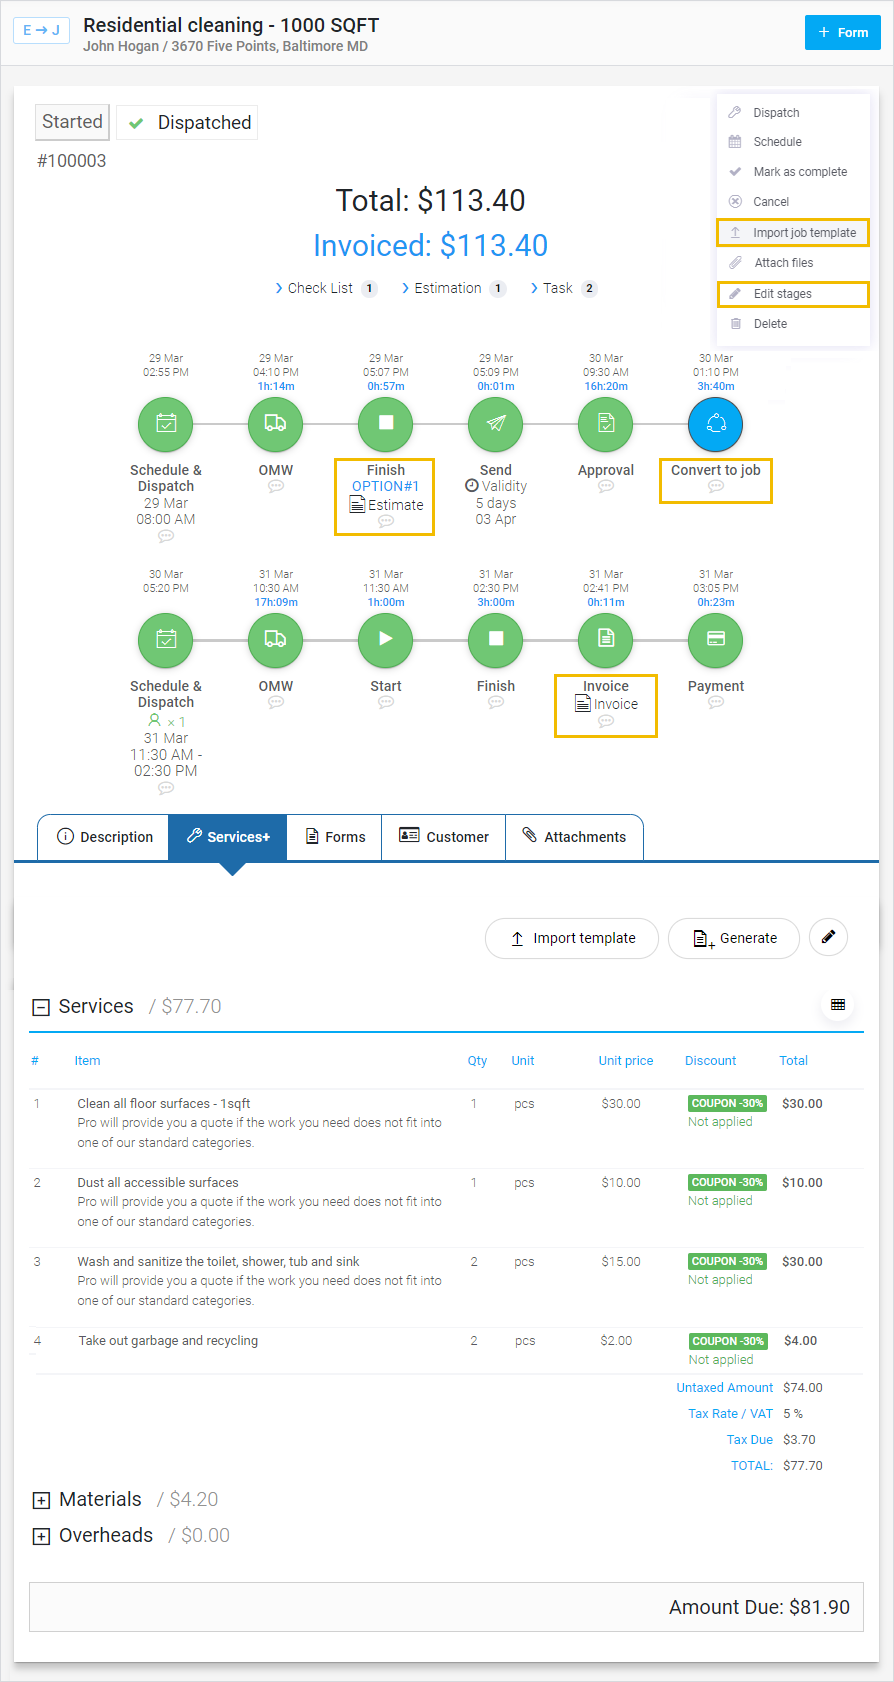 HouseService 365 Software - Job execution Wizard. 100% customizable (new steps can be added/removed on the fly). Customer notification option included for every step.